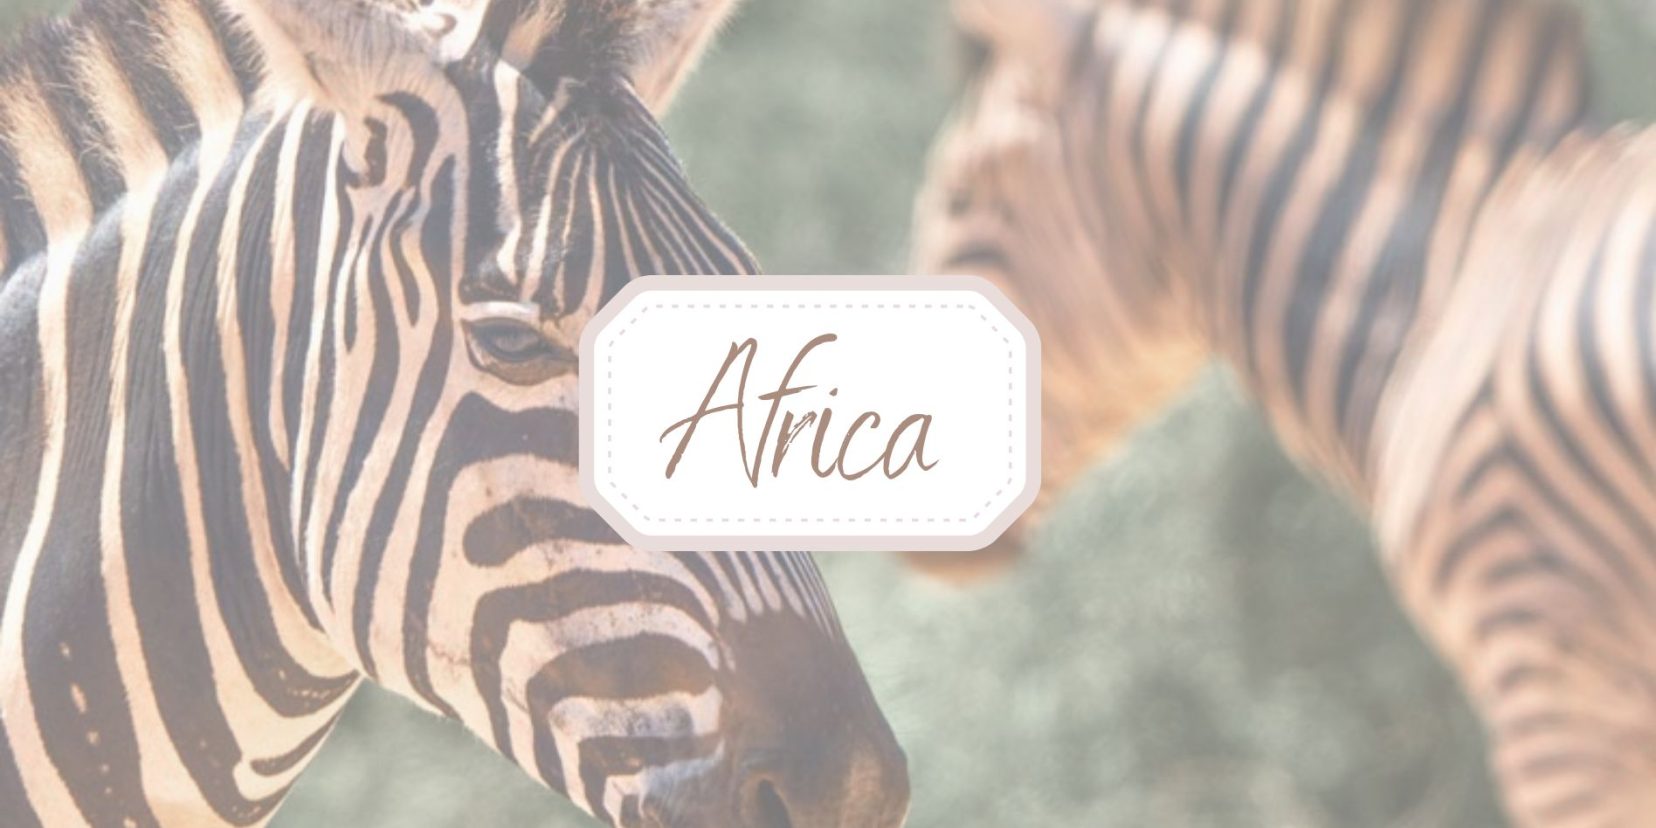 two zebras in Africa